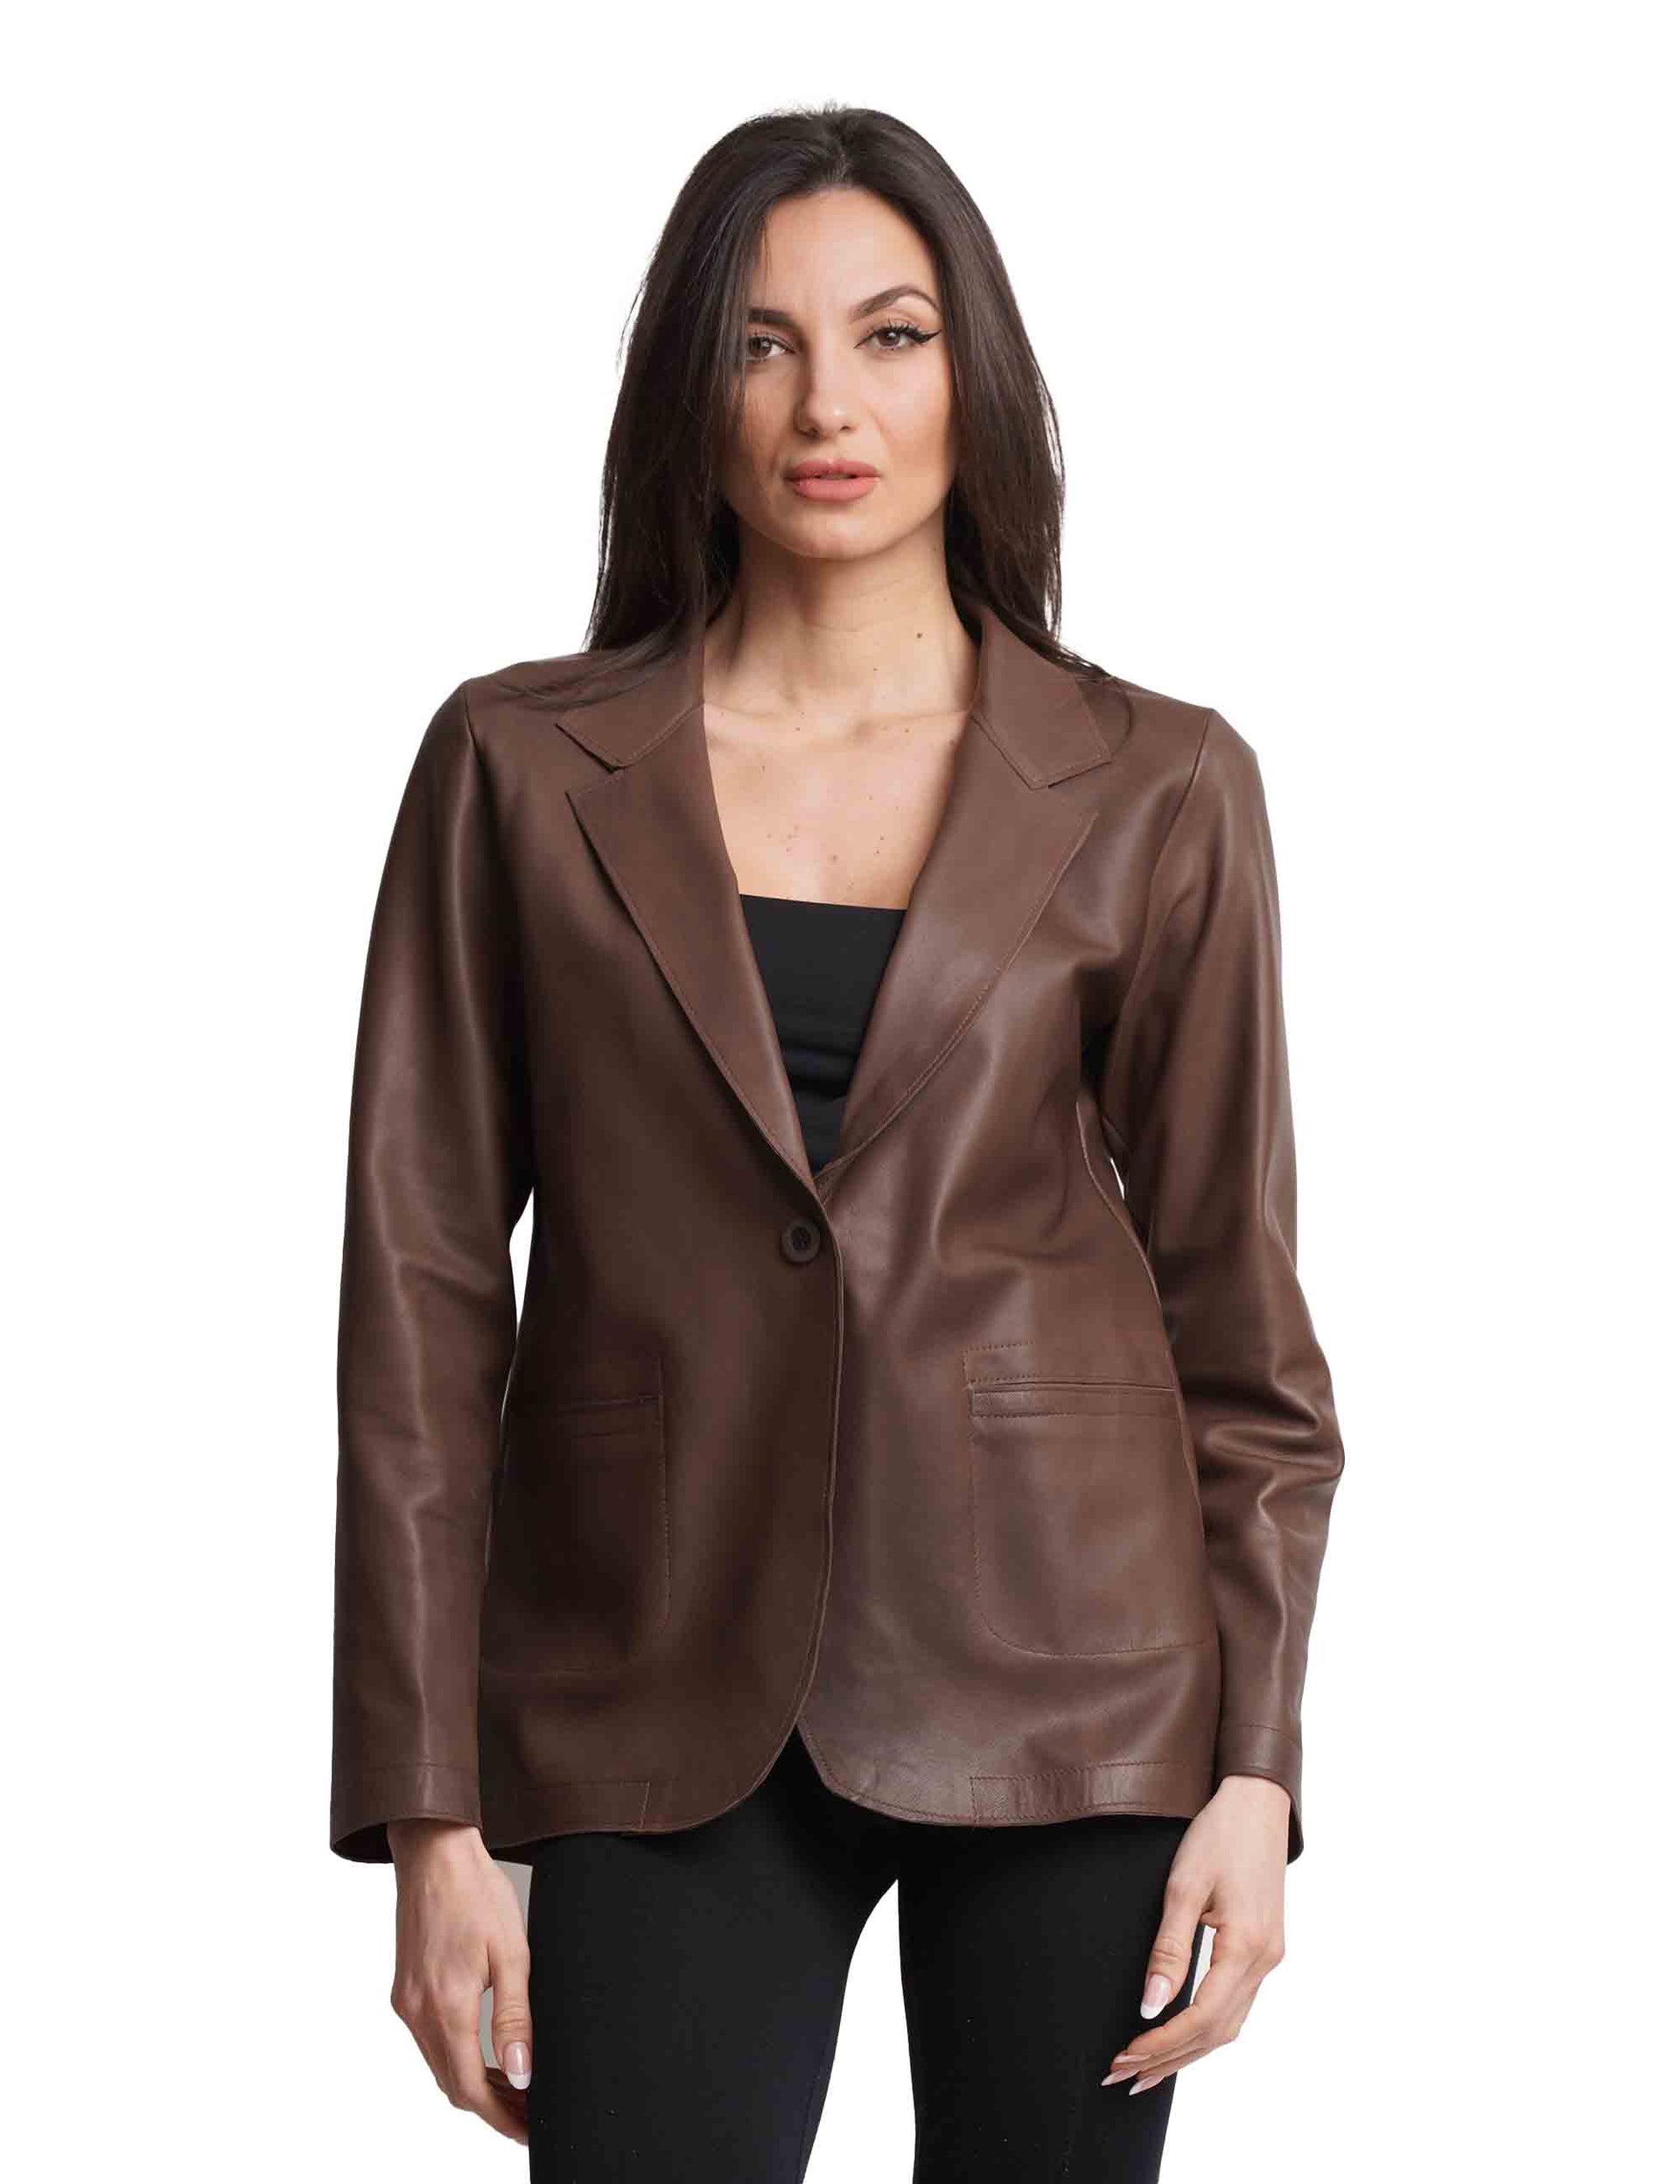 Single-breasted women's jackets in brown unlined leather with 1 button